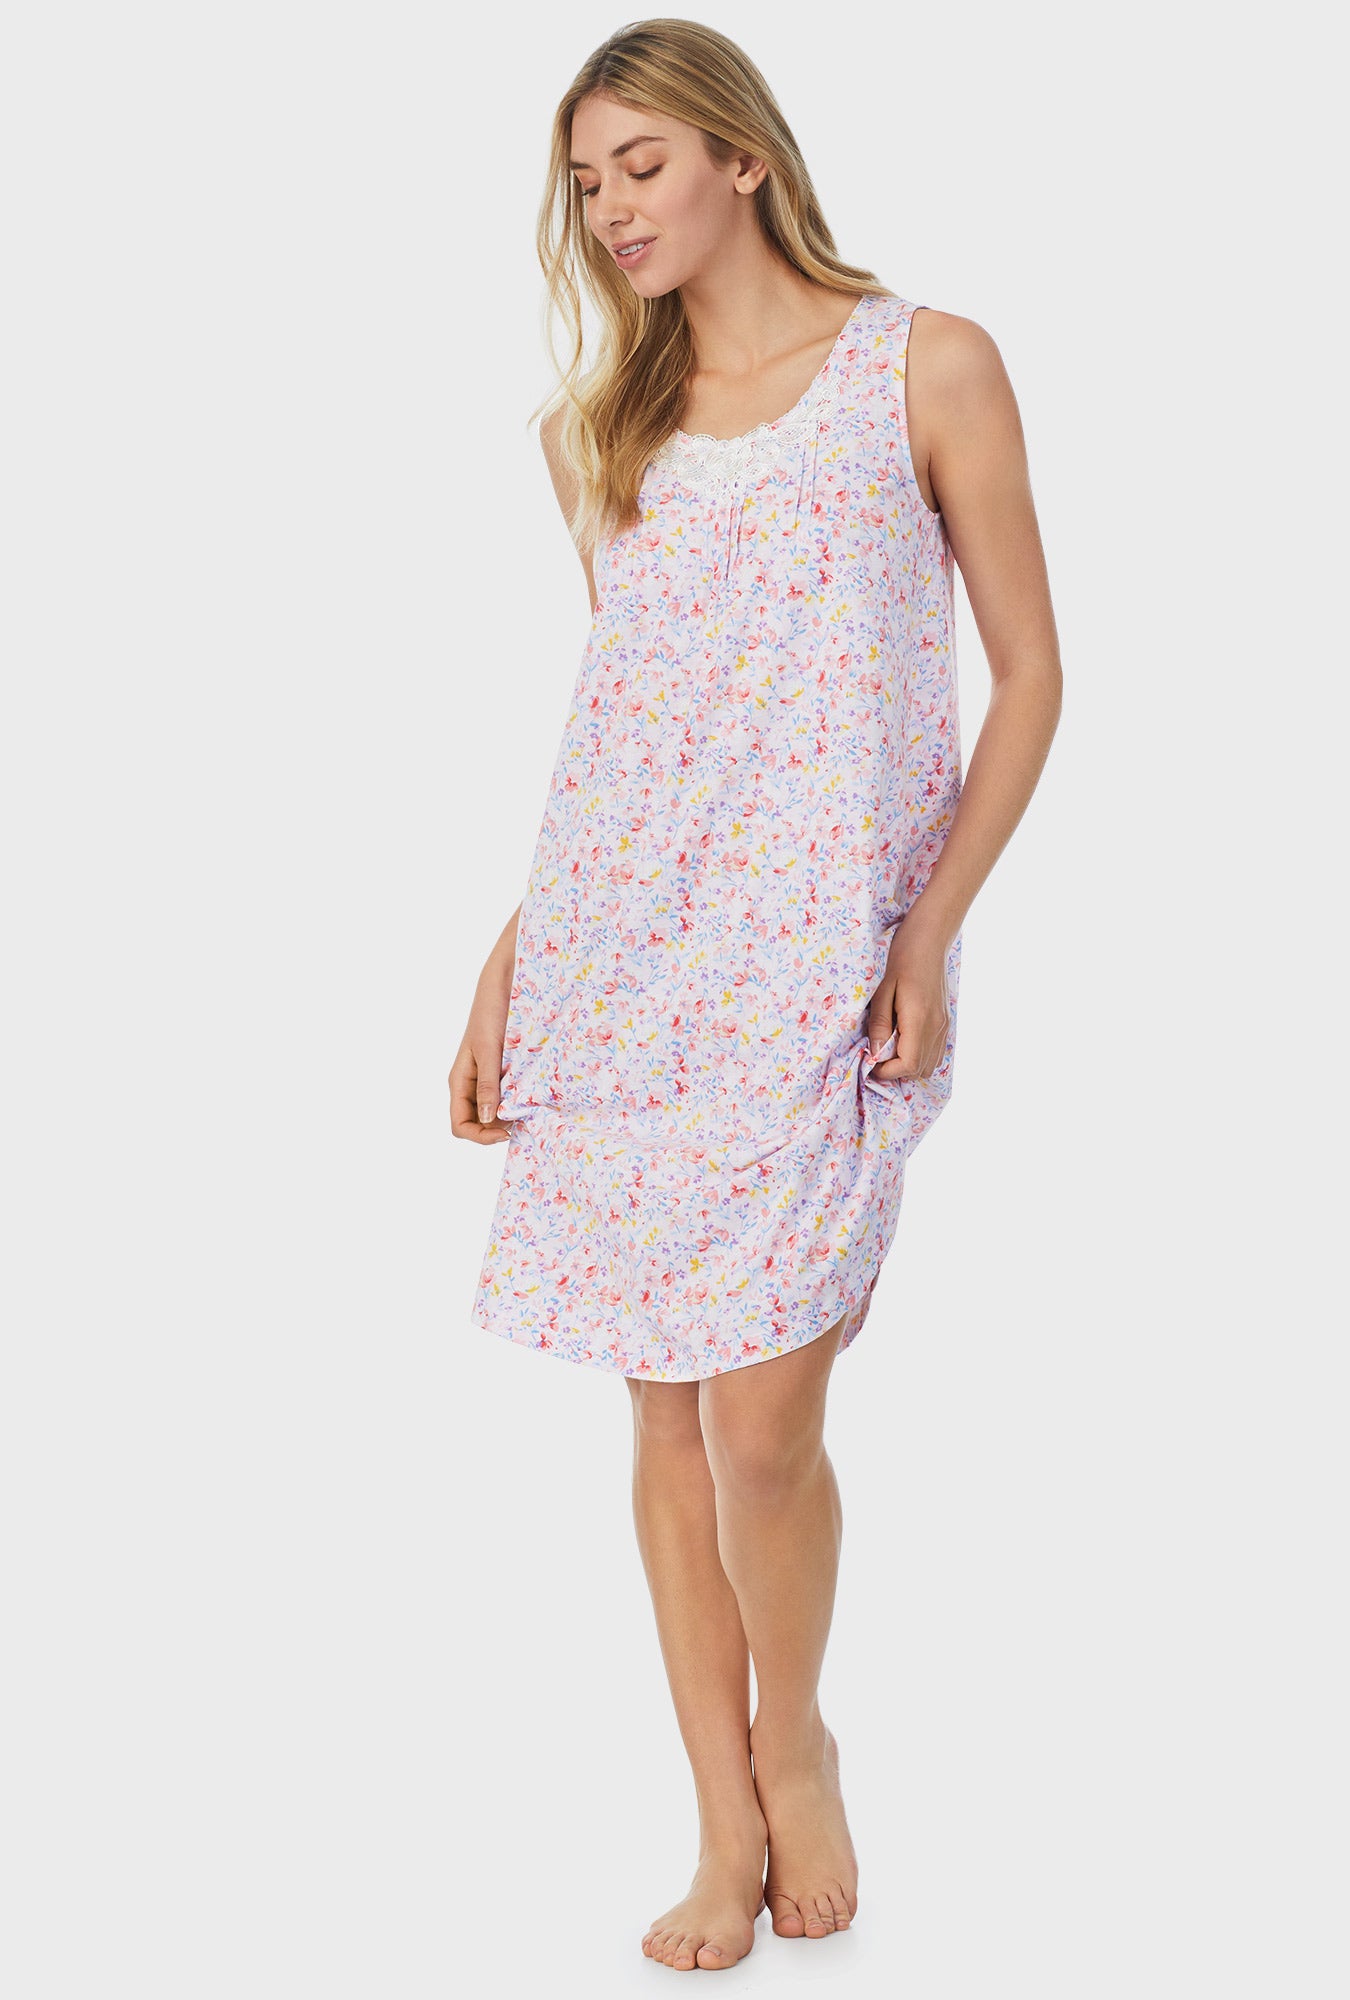 A lady wearing white sleeveless Waltz Nightgown with Garden Floral print